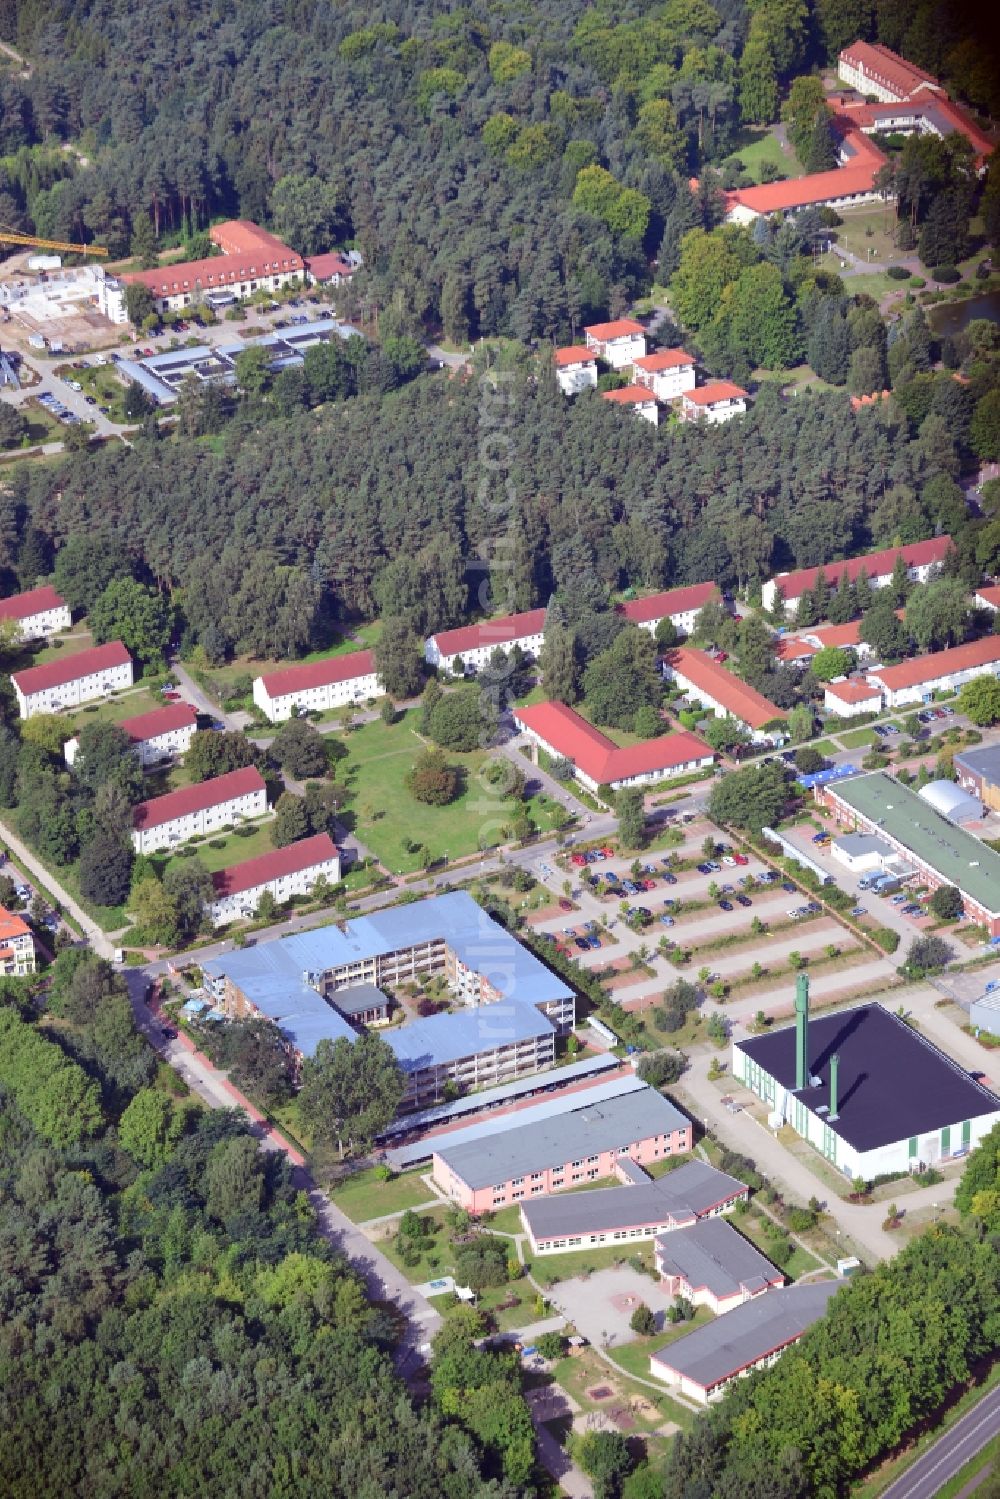 Bernau from the bird's eye view: View the clinic Brandenburg Bernau Waldfrieden on the grounds of the former residential area of the GDR government forest village near Bernau in Brandenburg under the leadership of Michel's Hospital Berlin-Brandenburg. Here to see the heating station, the retirement home Lindenhof and the Robinson School, which all belong to the clinic